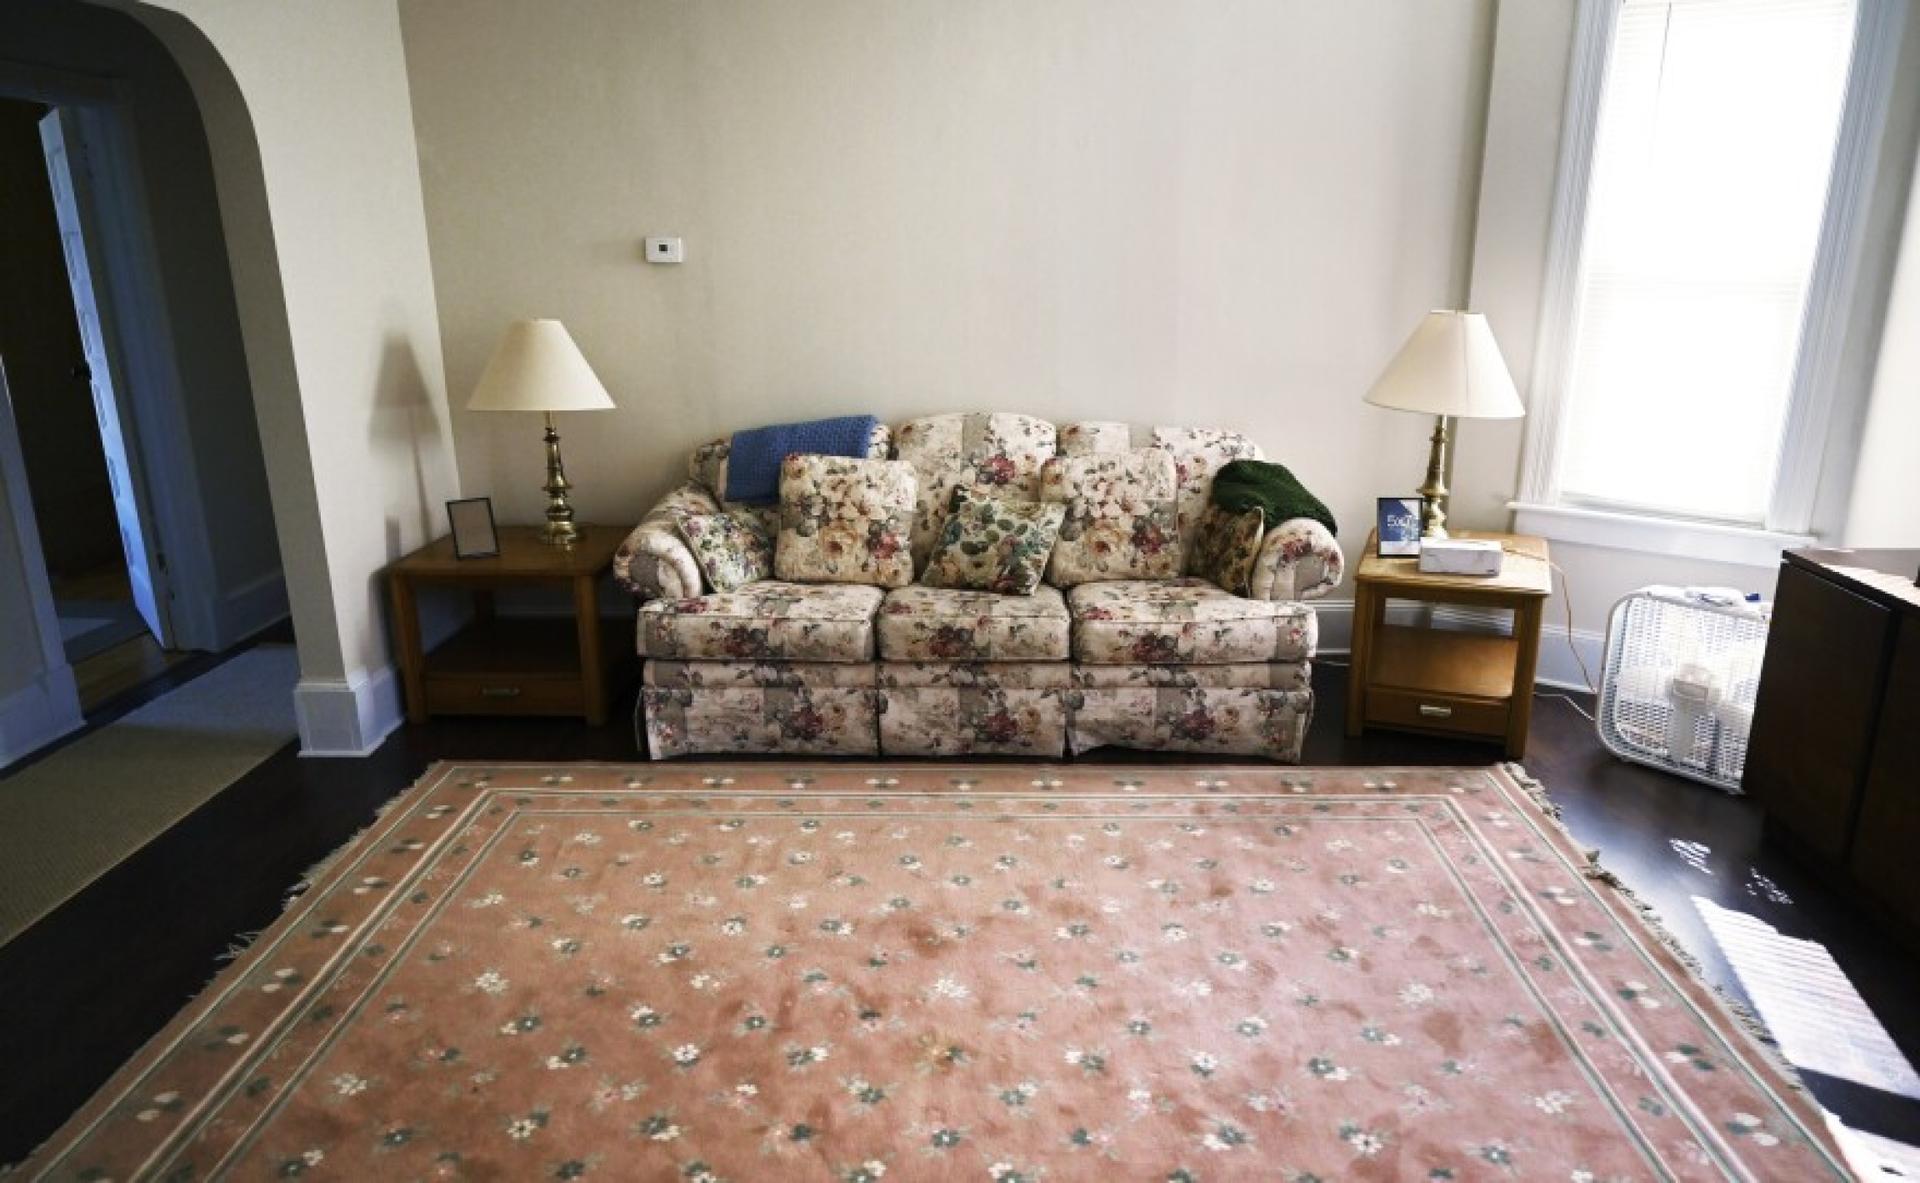 Here is the living room of the apartment that will be home to an Afghan family 